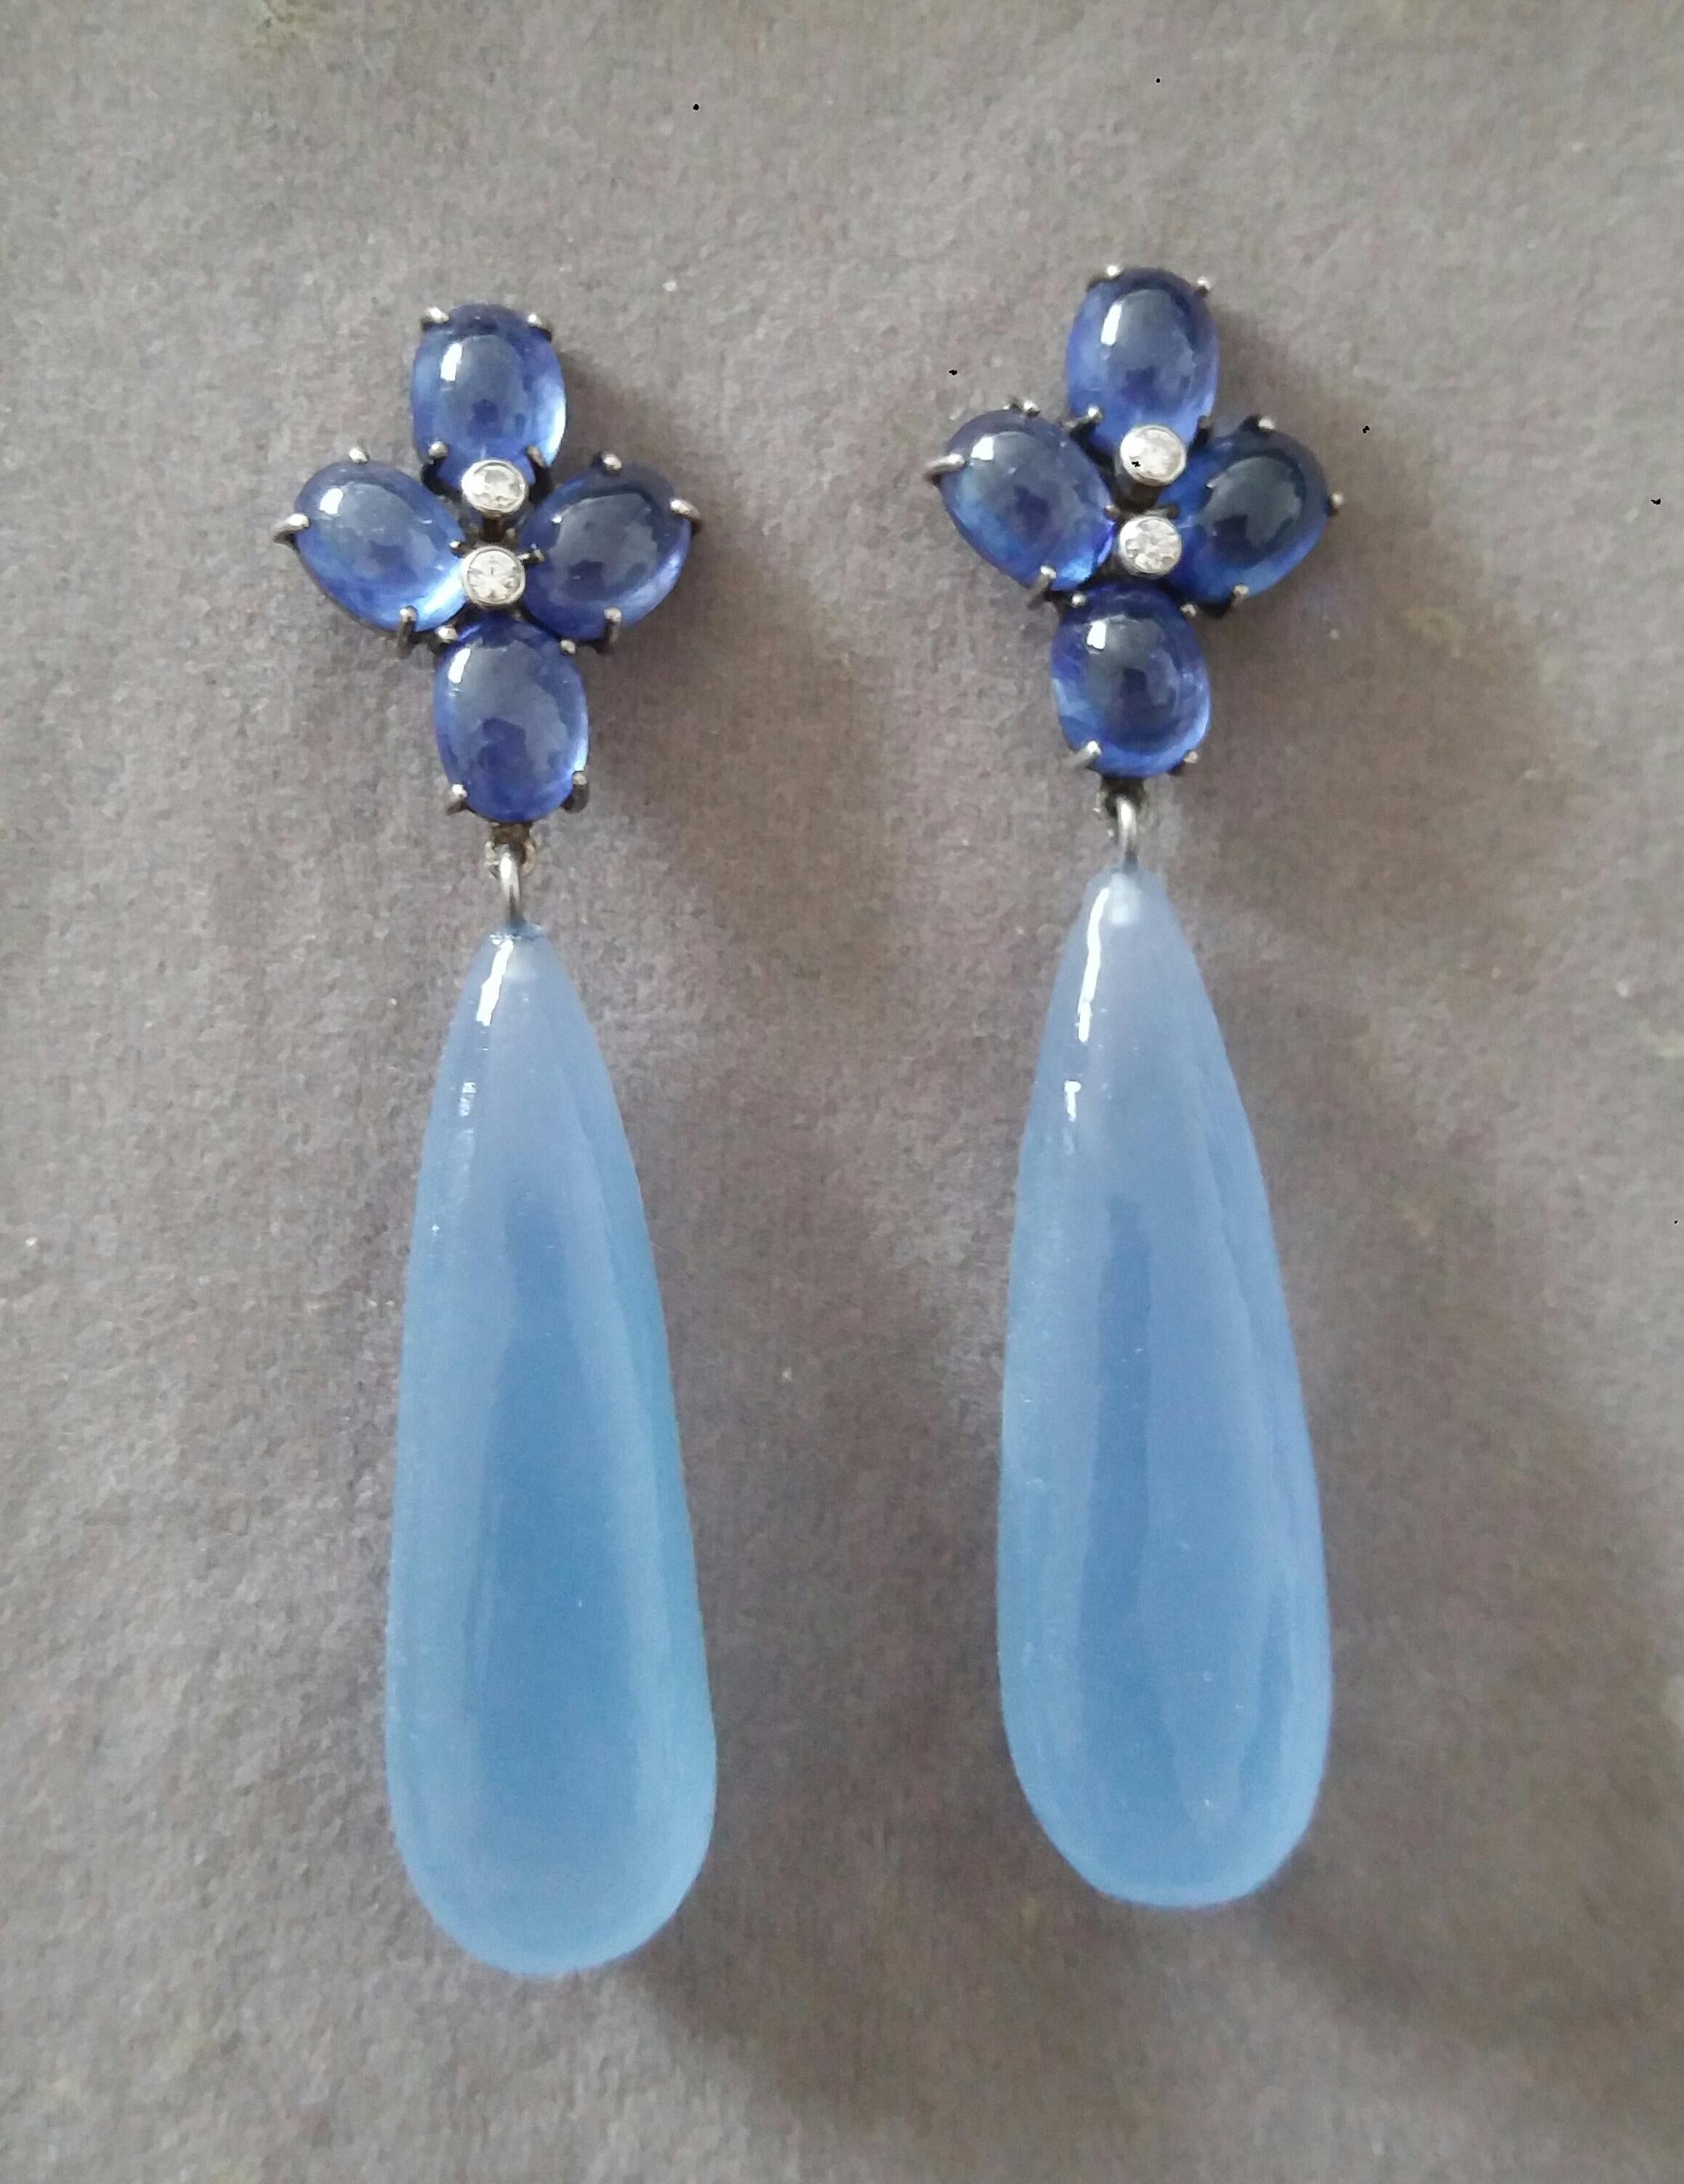 Elegant and completely handmade Earrings consisting of an upper part of 4 oval shape Blue Sapphires 6x8 mm  and weighing 20 Carats set together in 14 Kt white gold with 2 small diamonds in the center, at the bottom we have 2 Pear Shape Chalcedony